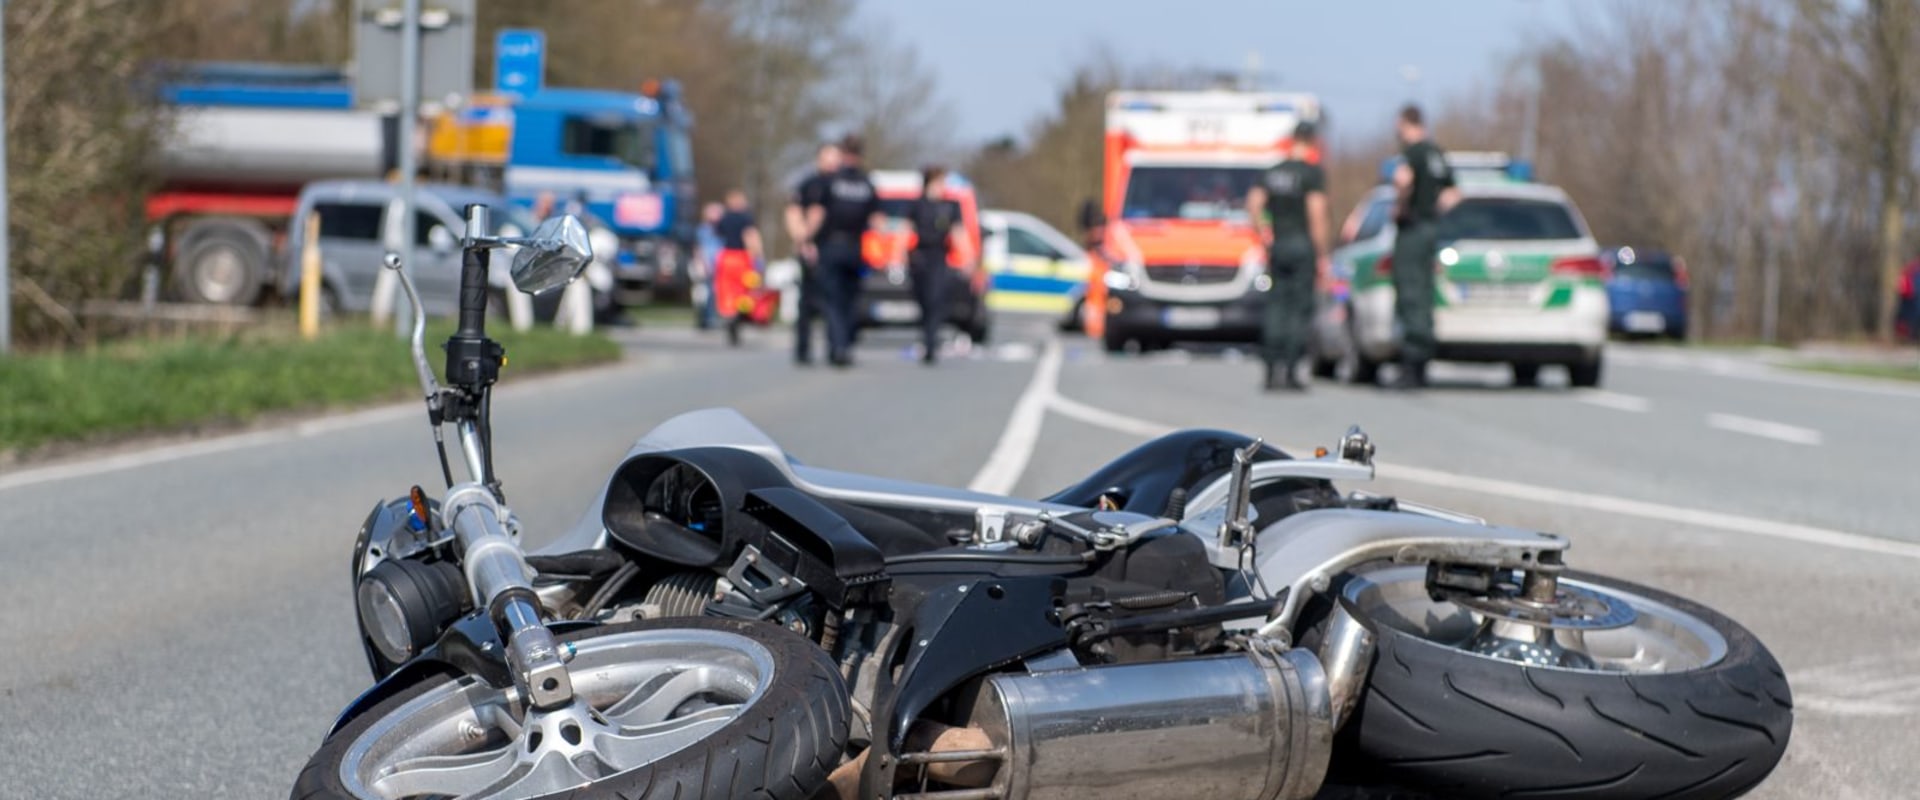 Personal Injury Legal Strategy: Why Is It Important To Have A Motorcycle Accident Lawyer For Your Case In Philadelphia, PA